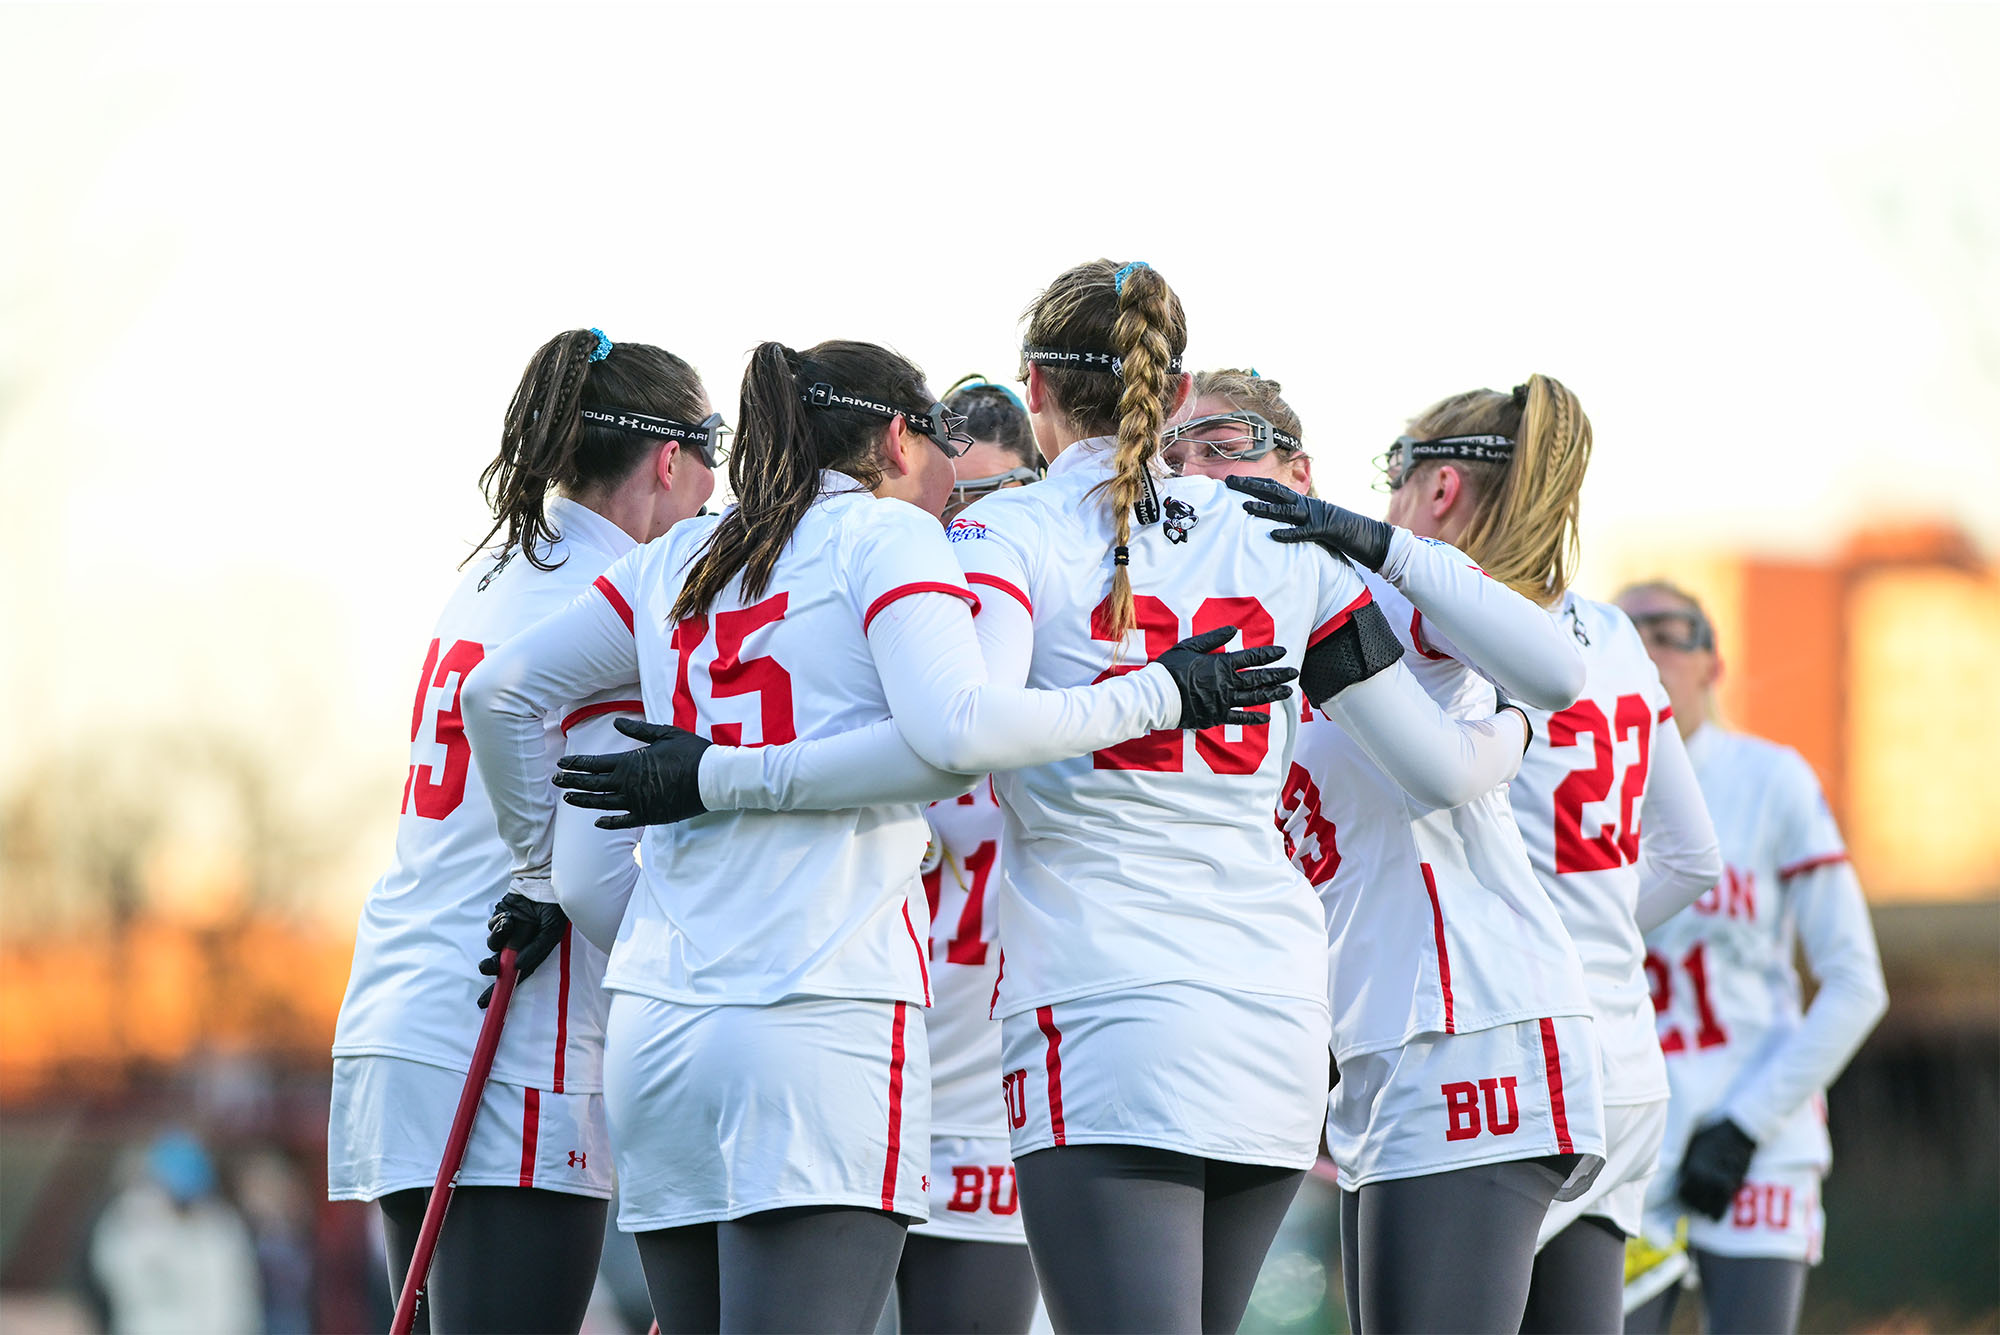 Photo: A picture of a woman's lacrosse team in a huddle. Their uniforms are white with red accents